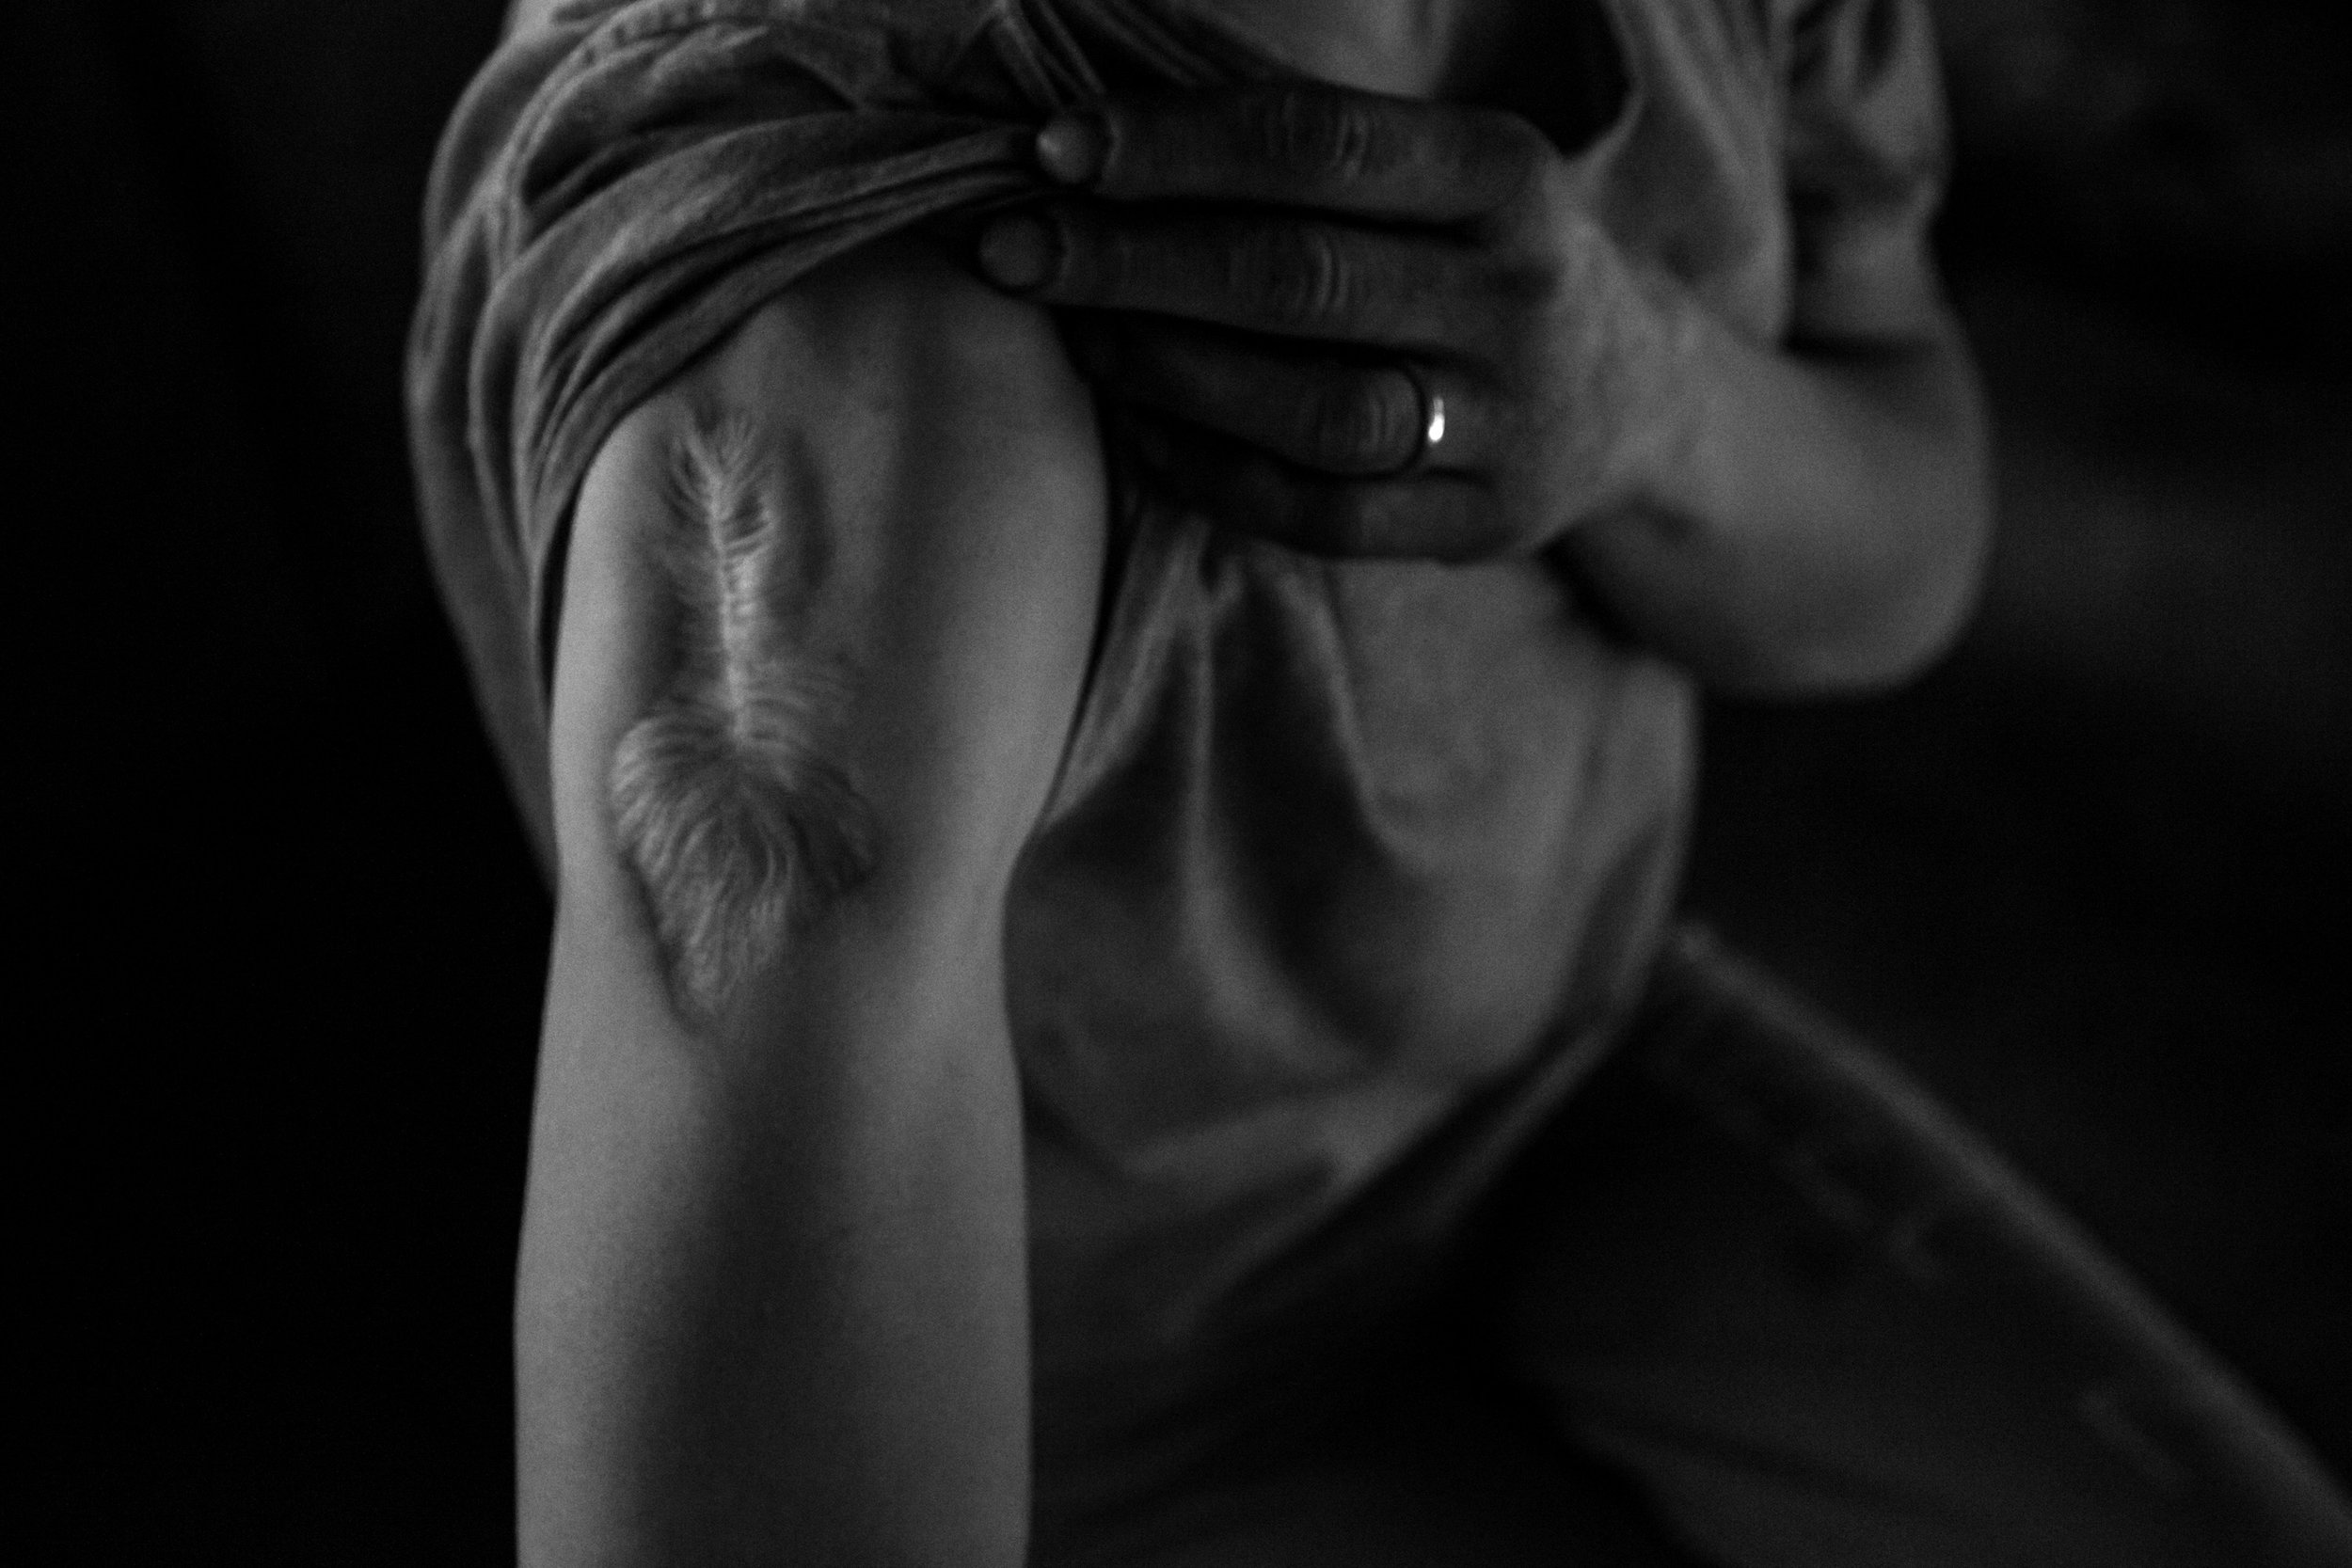  37-year-old Angie Ulrich pulls back her sleeve to show the scar from the abscess that was removed from her arm due to heroin use, Thursday, May 26, 2016. Ulrich as been on and off heroin, and in and out of the Jungle, over the last 15 years. 